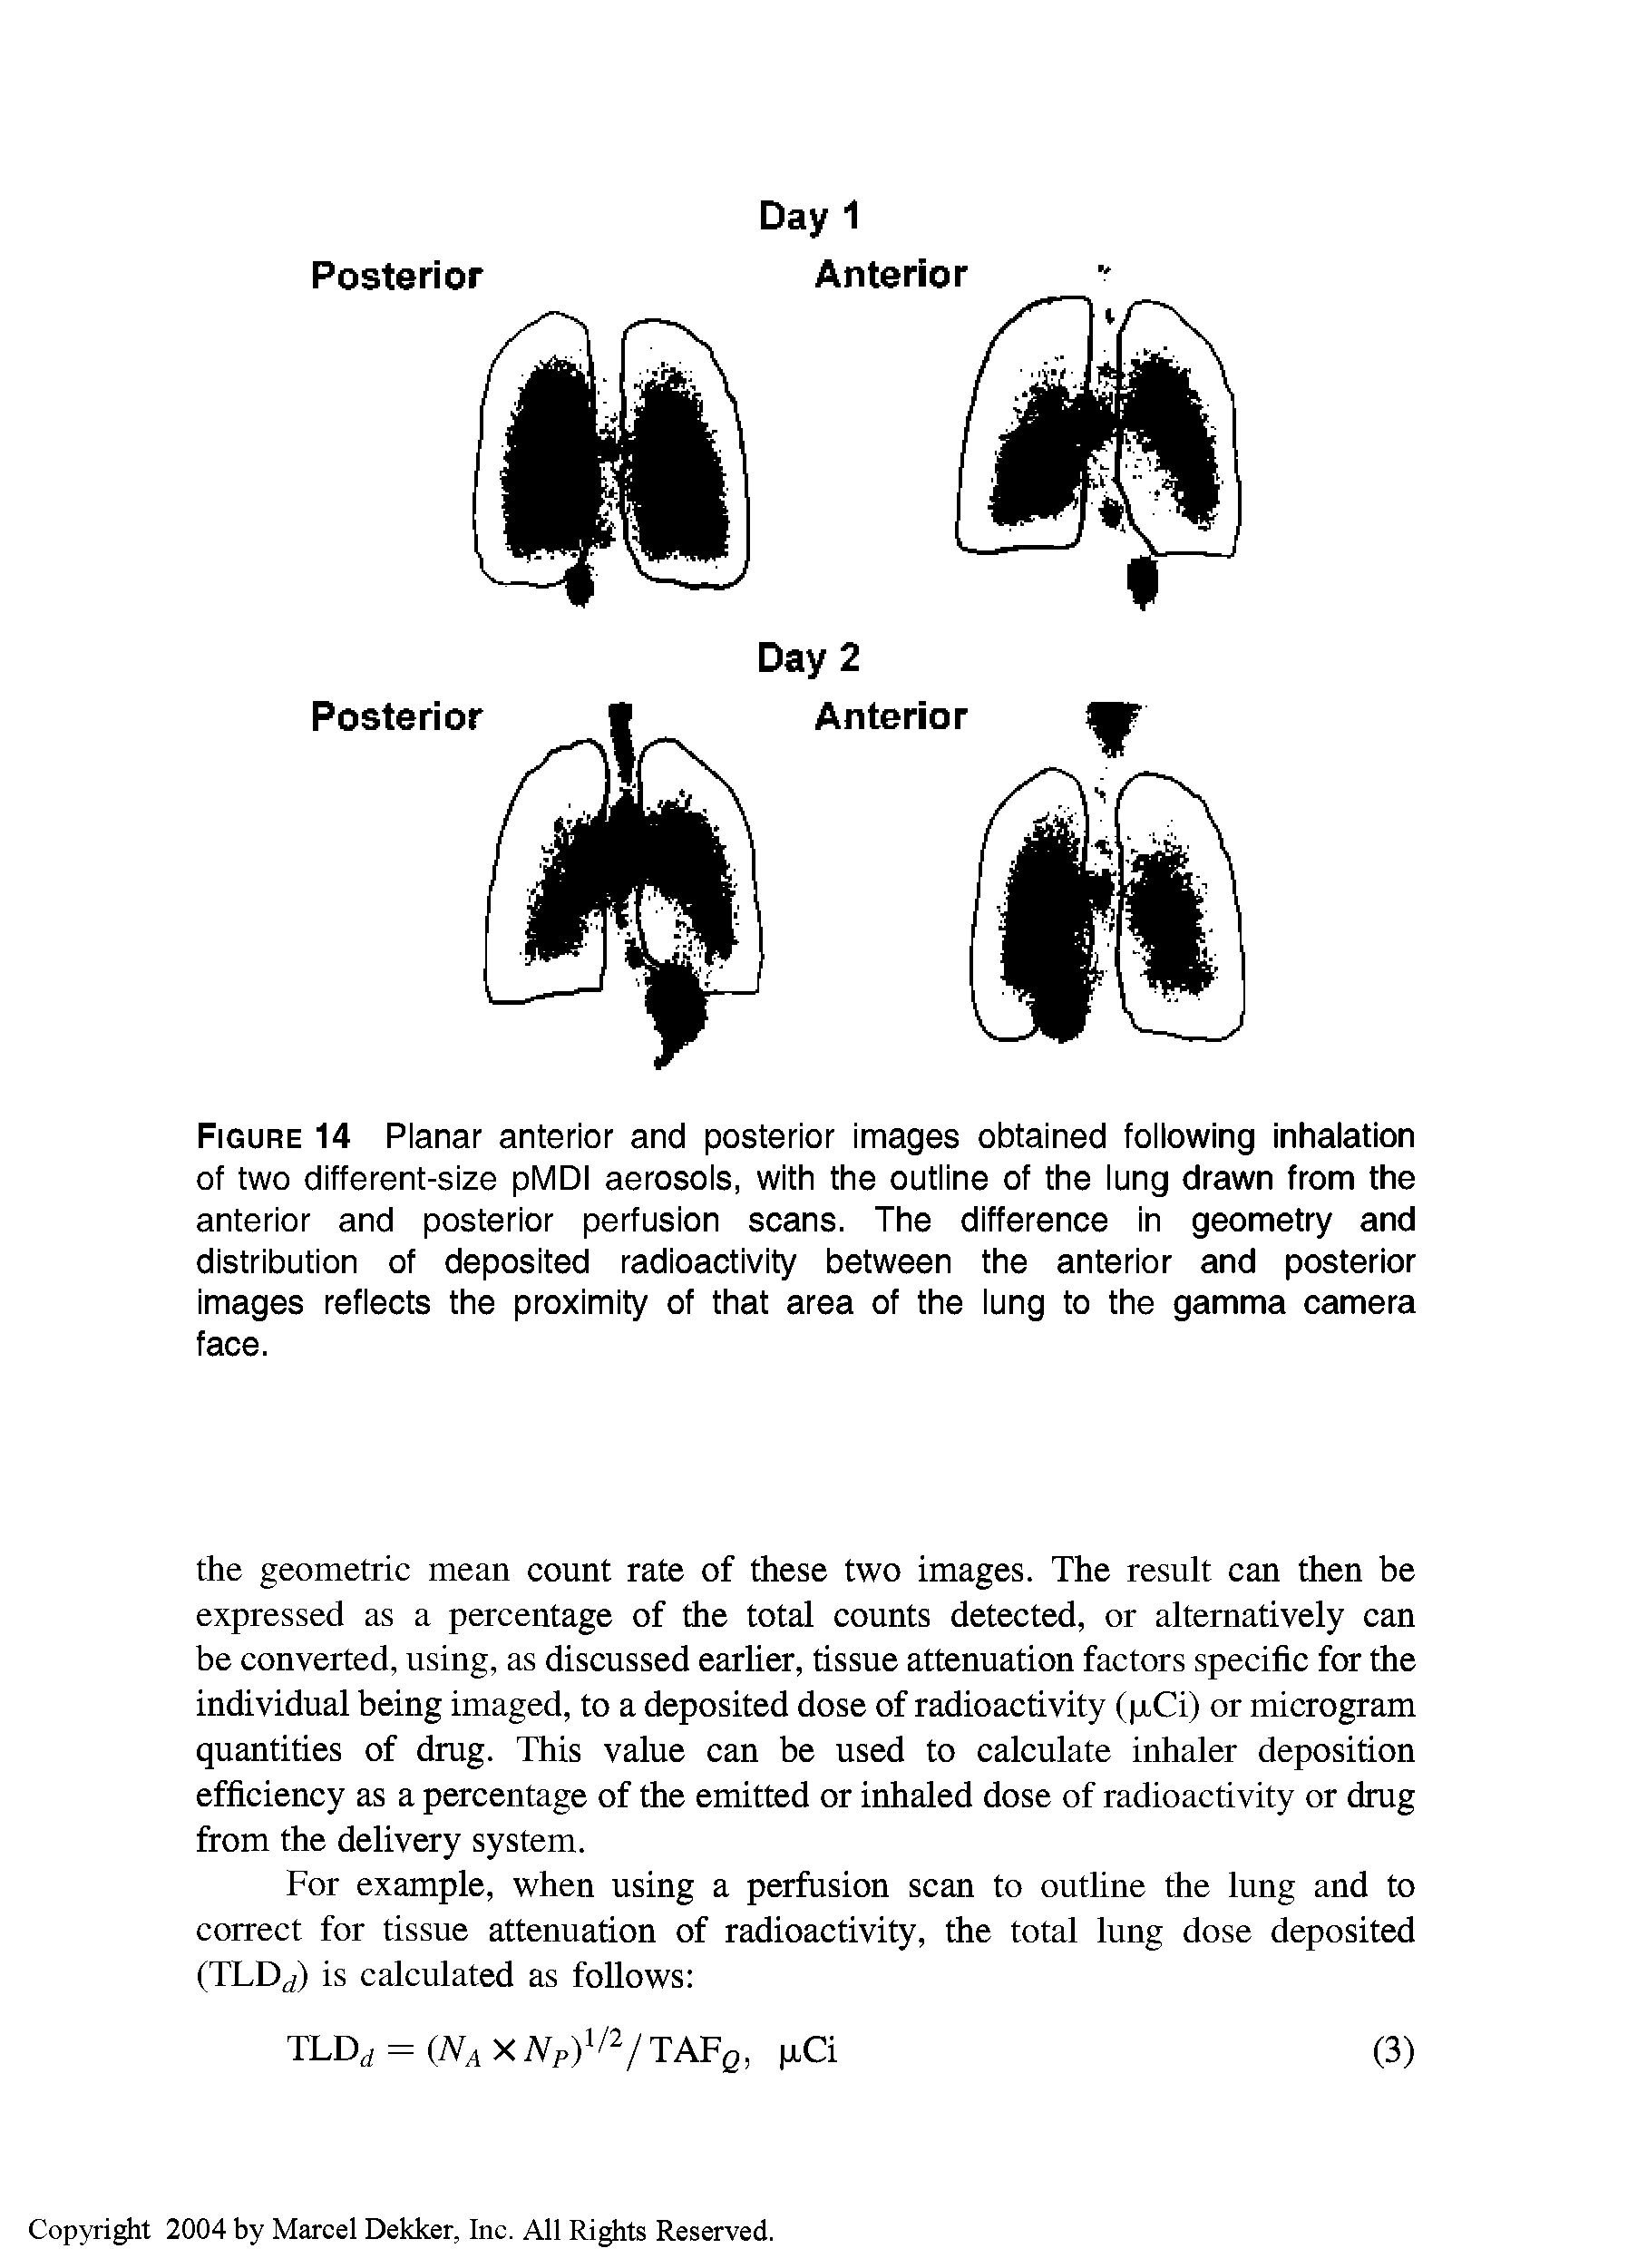 Figure 14 Planar anterior and posterior images obtained following inhalation of two different-size pMDI aerosols, with the outline of the lung drawn from the anterior and posterior perfusion scans. The difference in geometry and distribution of deposited radioactivity between the anterior and posterior images reflects the proximity of that area of the lung to the gamma camera face.